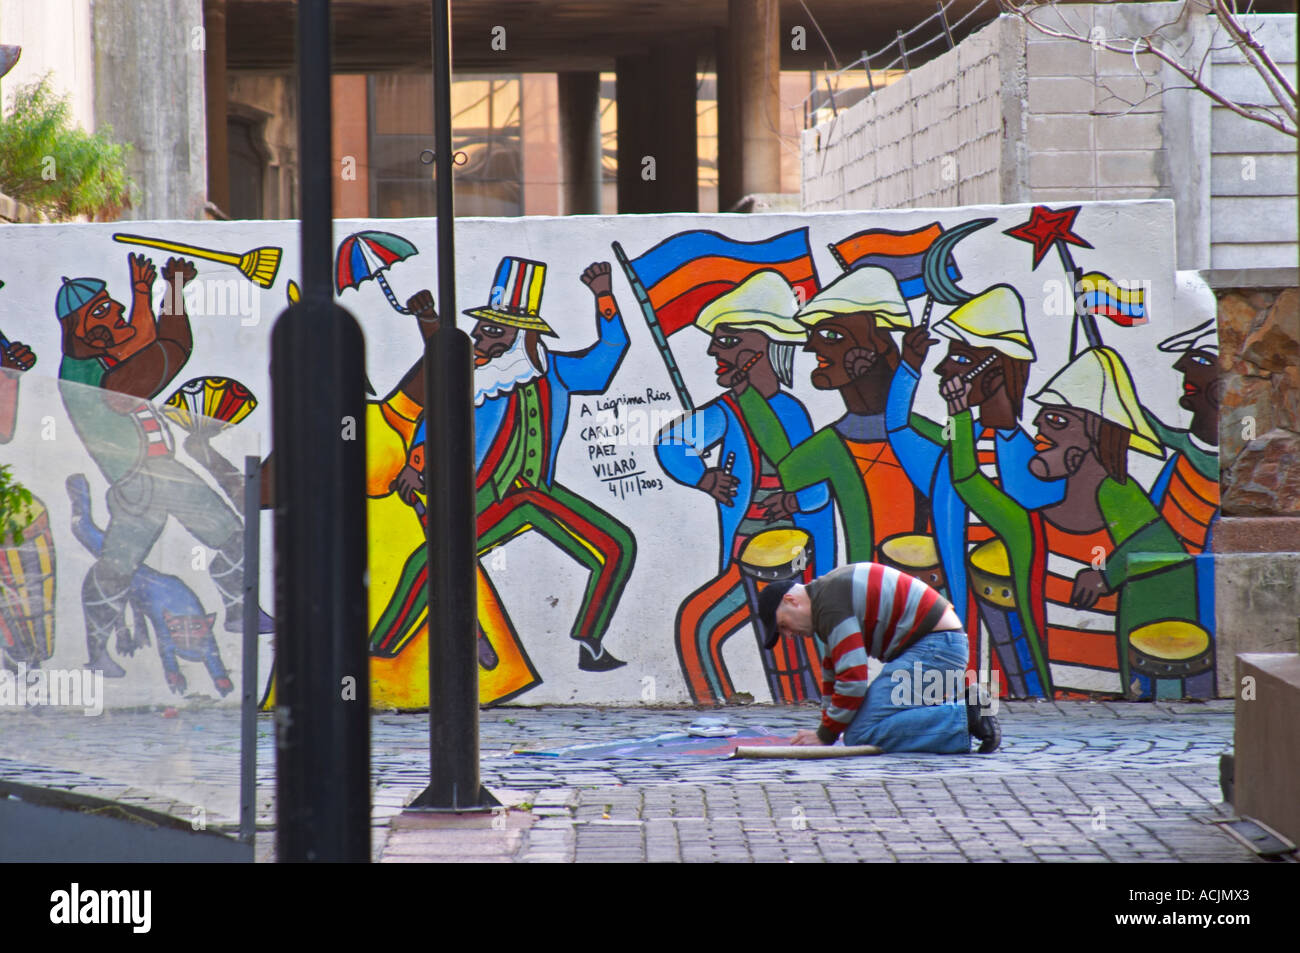 A man making a street painting on the pavement in front of a wall fresco painting with colourful men depicting an historic event titled A Lagrima Rios by Carlos Paez Vilaro Montevideo, Uruguay, South America Stock Photo